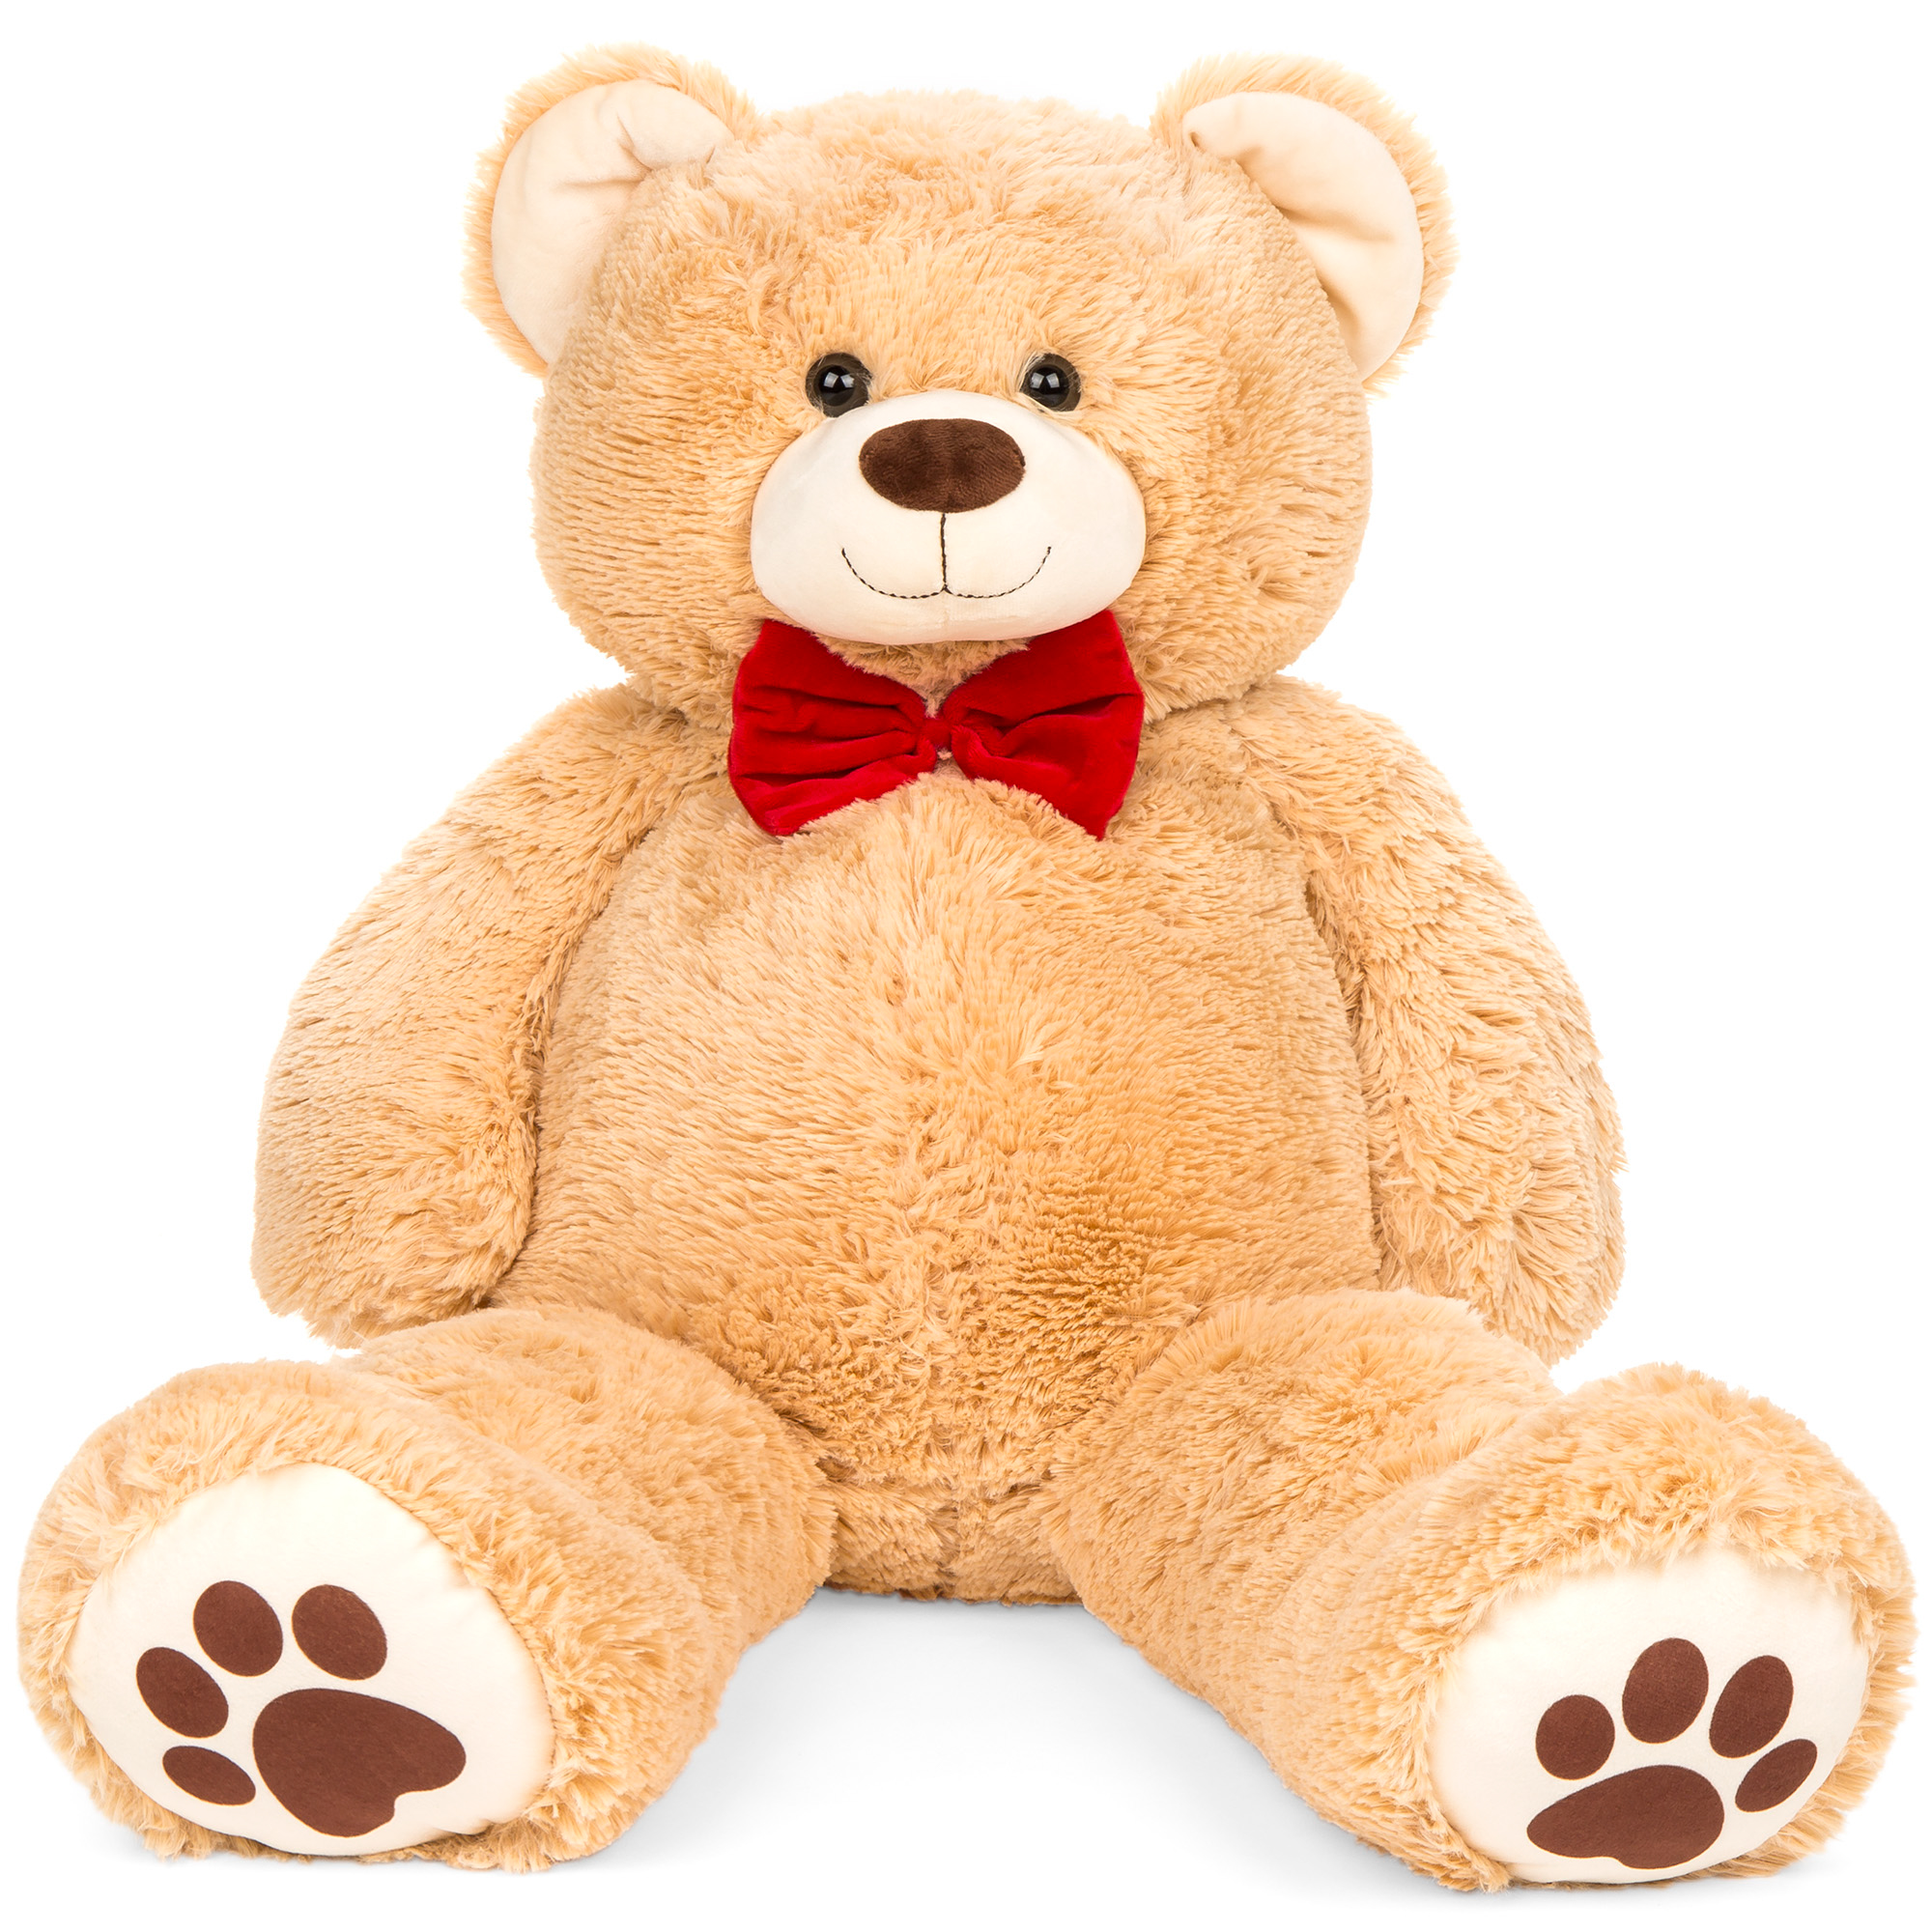 Best Choice Products 35in Giant Soft Plush Teddy Bear Stuffed Animal Toy w/ Bow Tie, Footprints - Brown - image 1 of 8